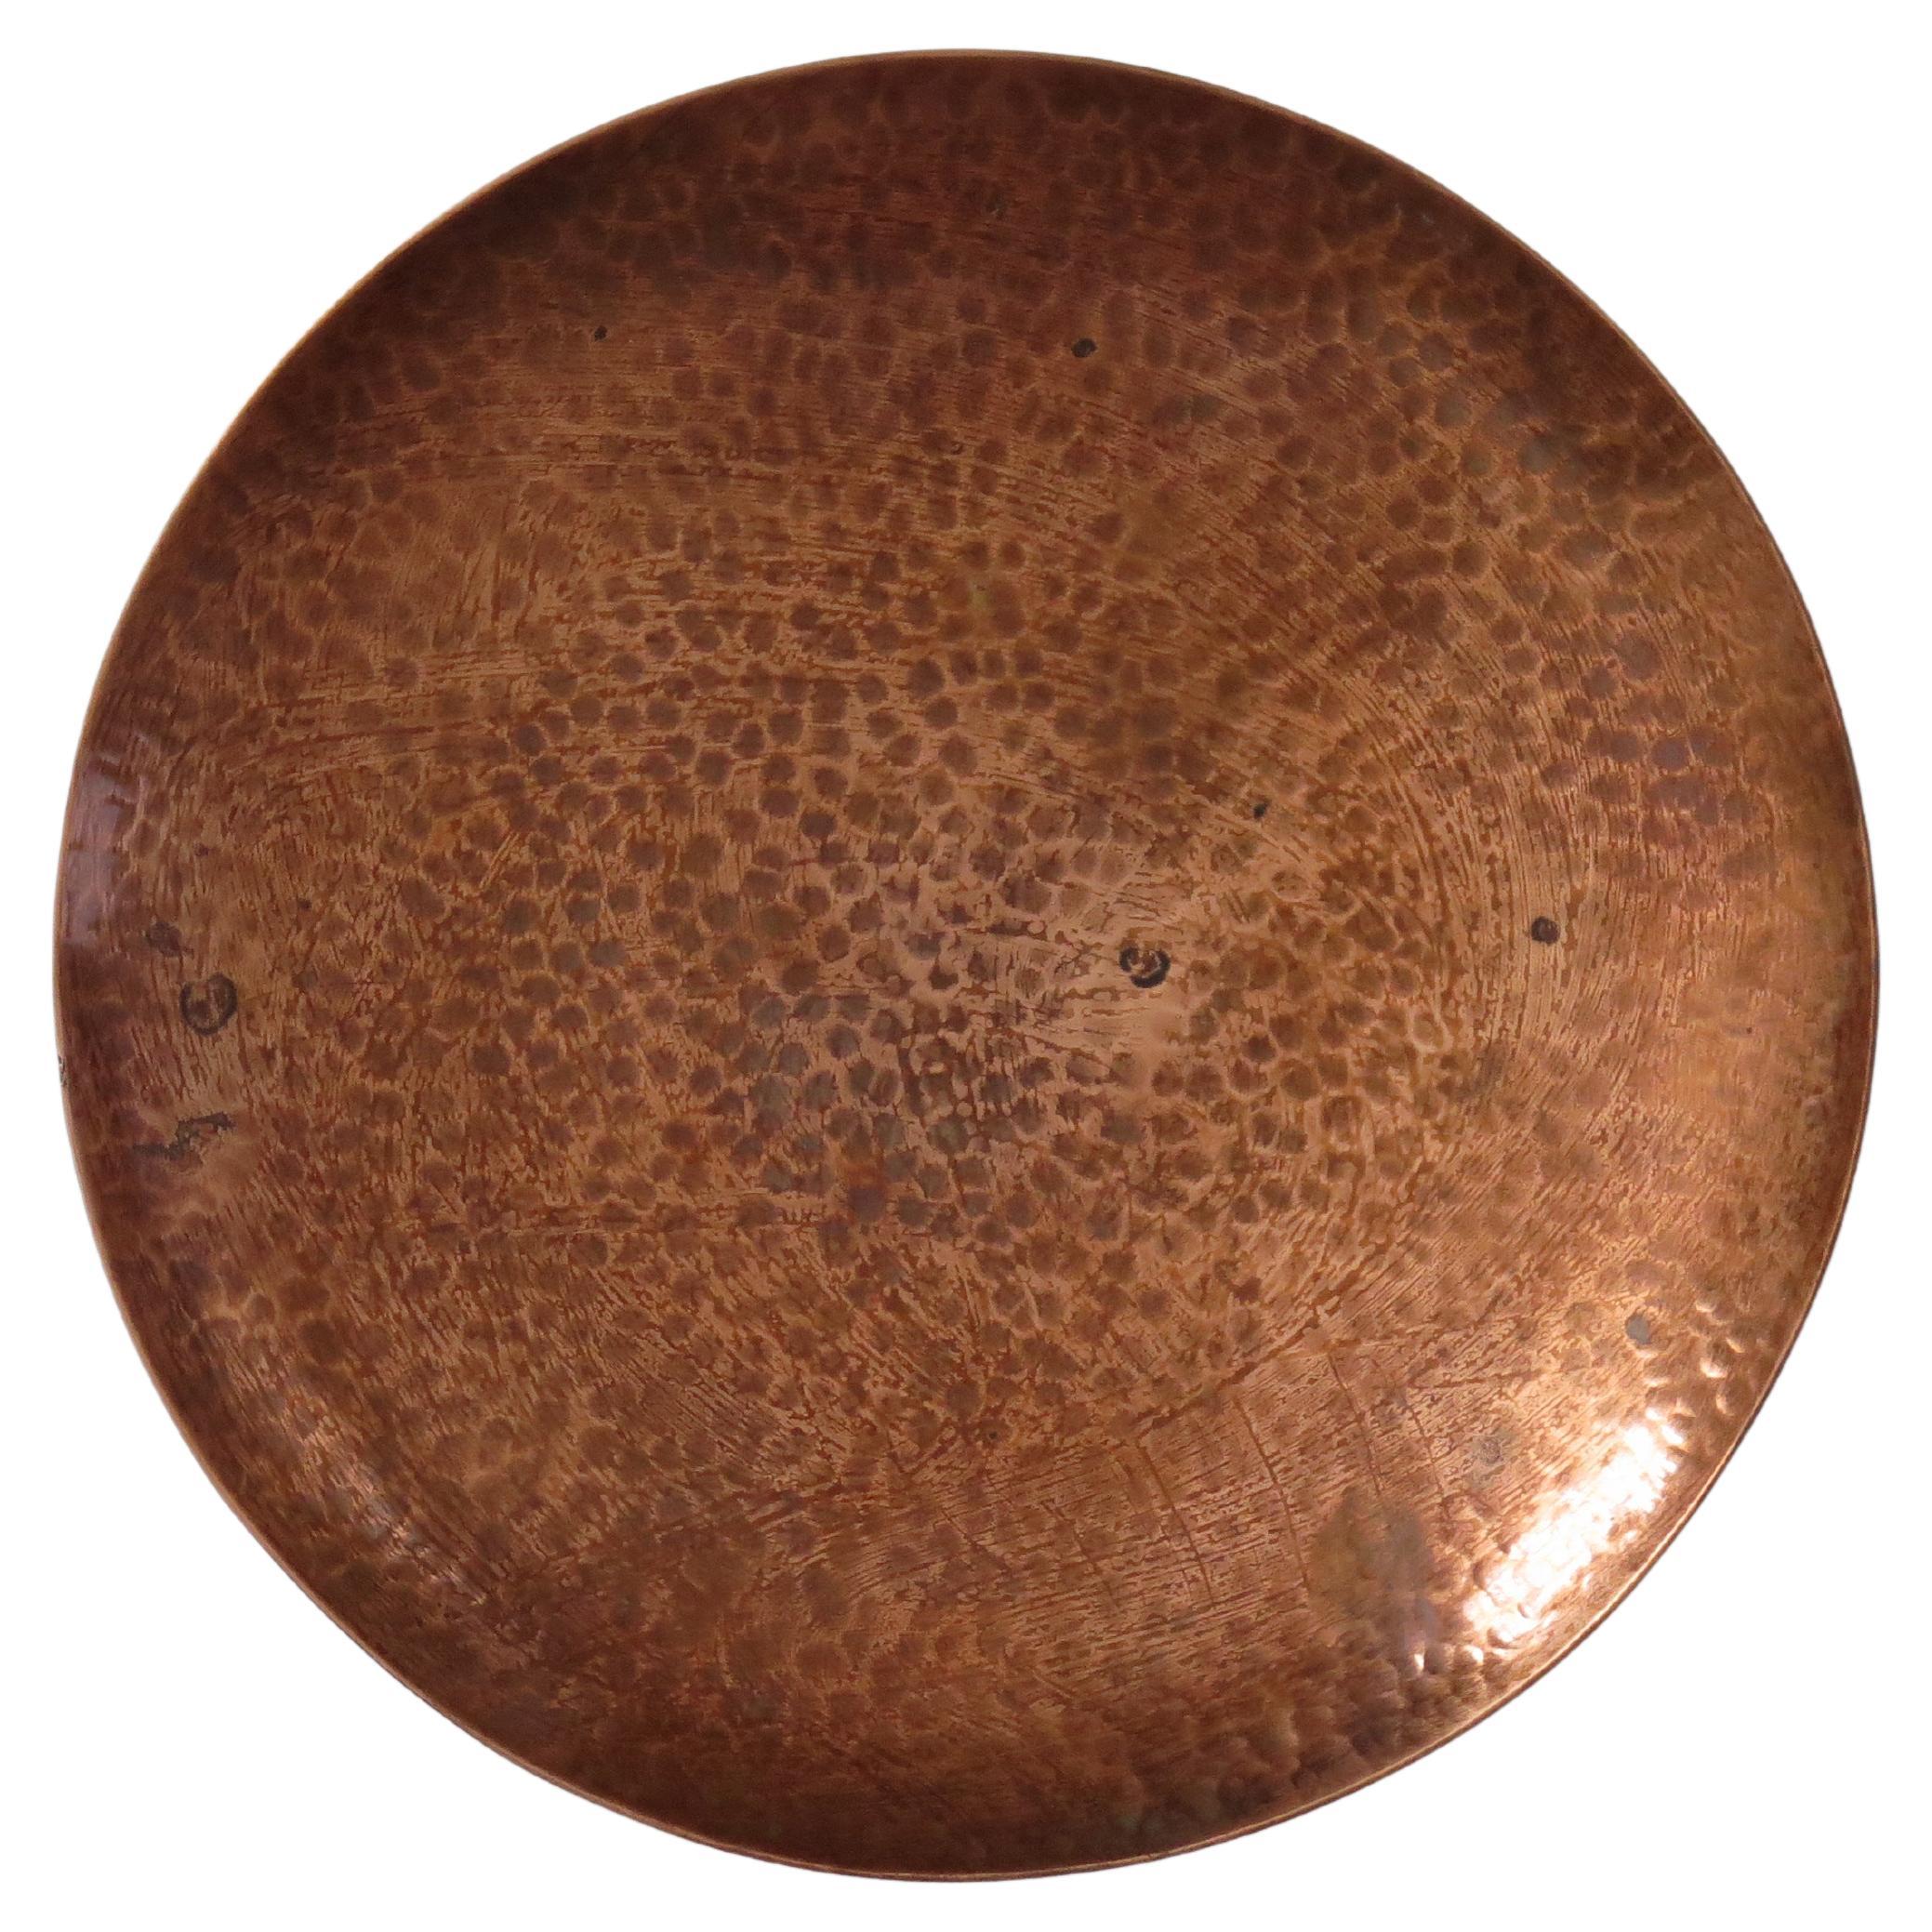 This is a hand made, hammered copper dish made by Harold Barnes an English Yorkshire coppersmith, all in the Arts and Crafts style and dating to the mid 20th Century.

The dish is made of finely hand planished copper and sits on three small bun